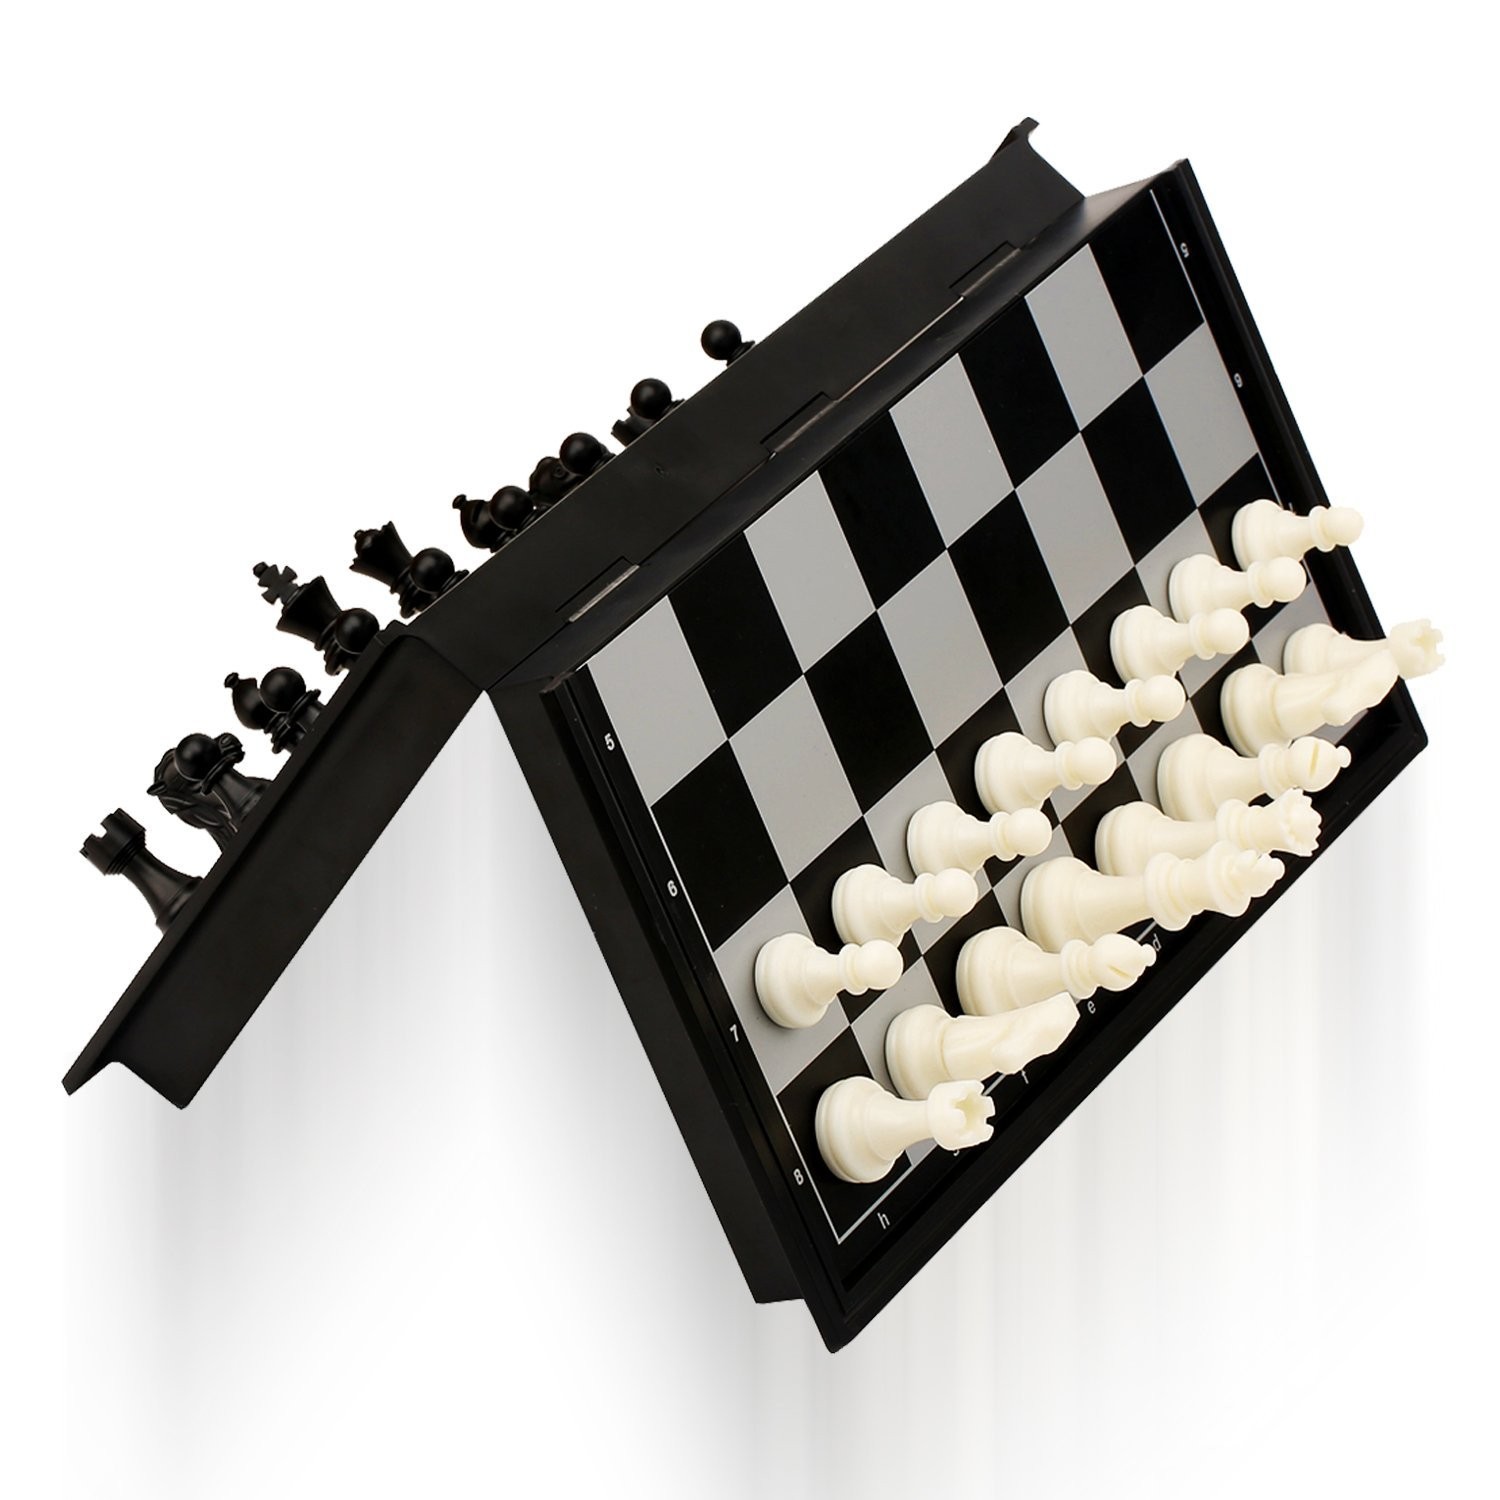 Chessable on X: Some games of chess are so famous that they even